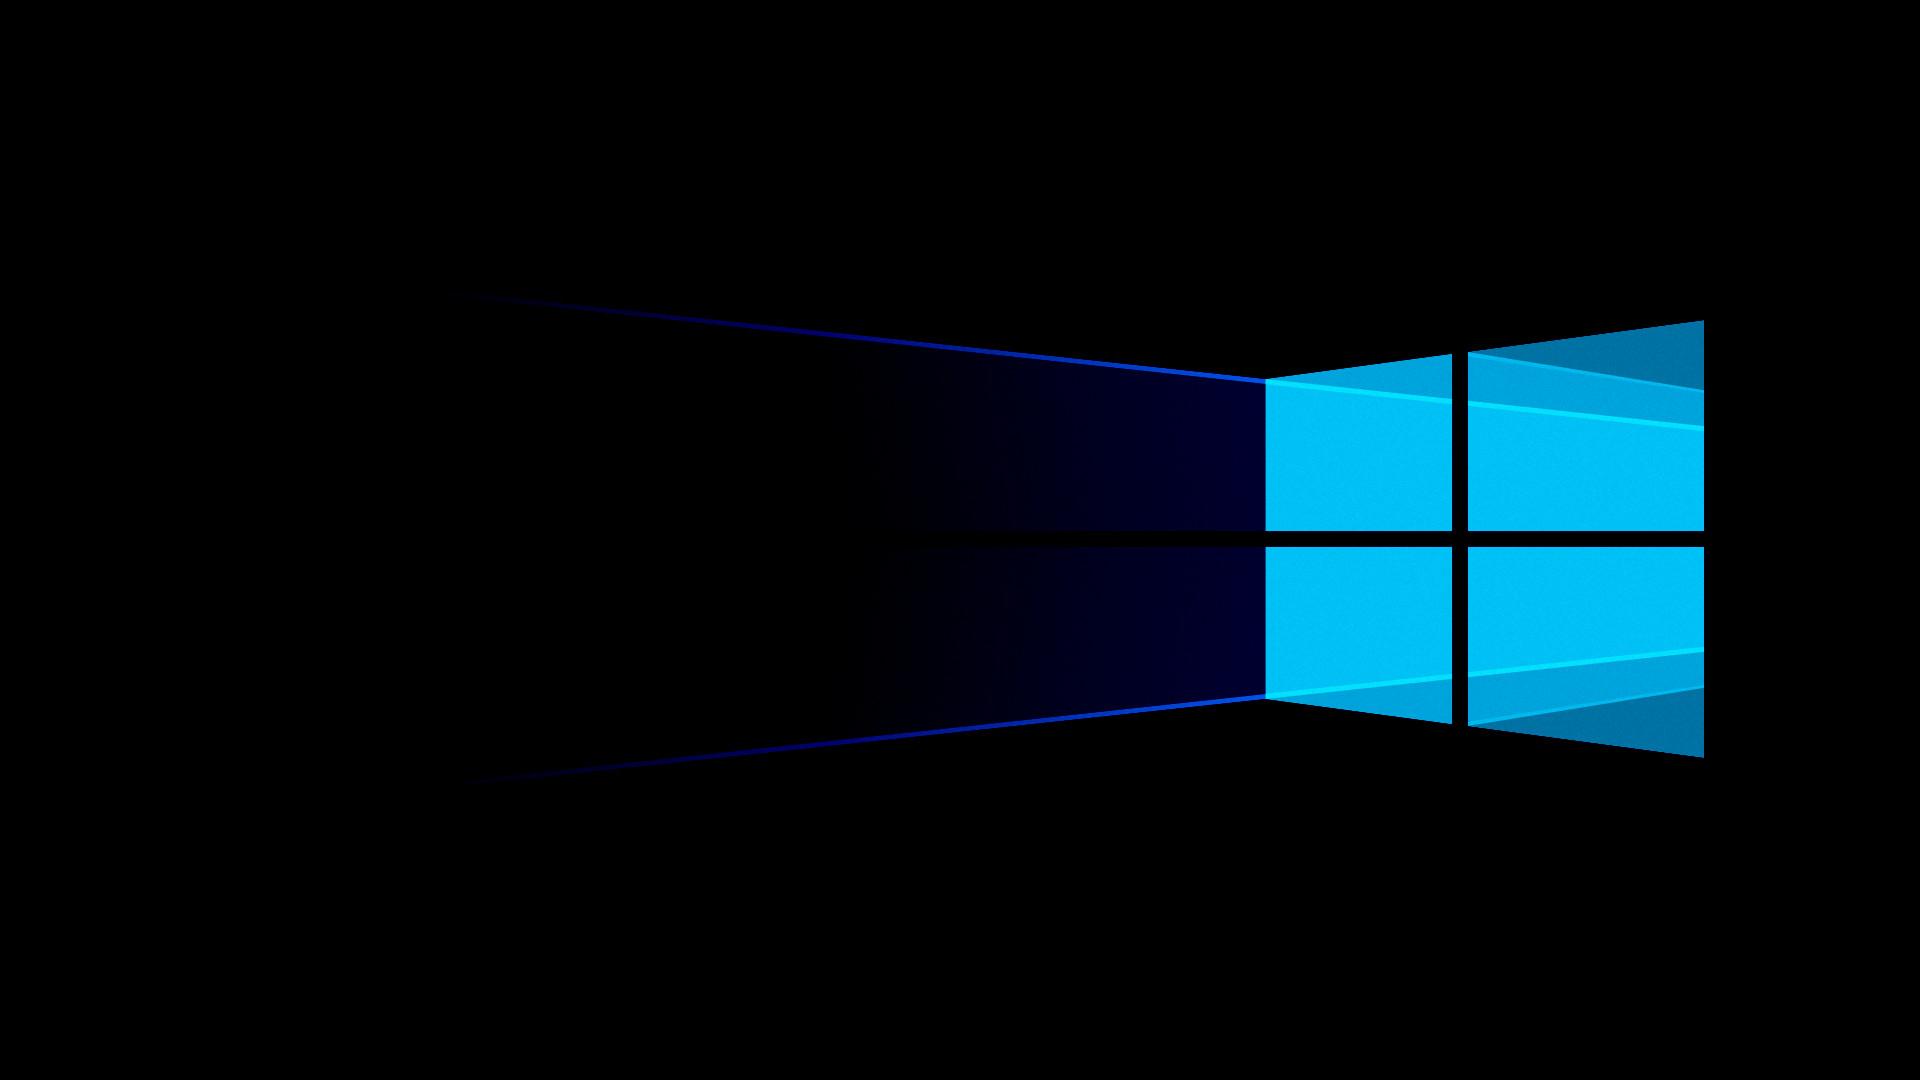 Collection of Windows 10 Hero Wallpapers